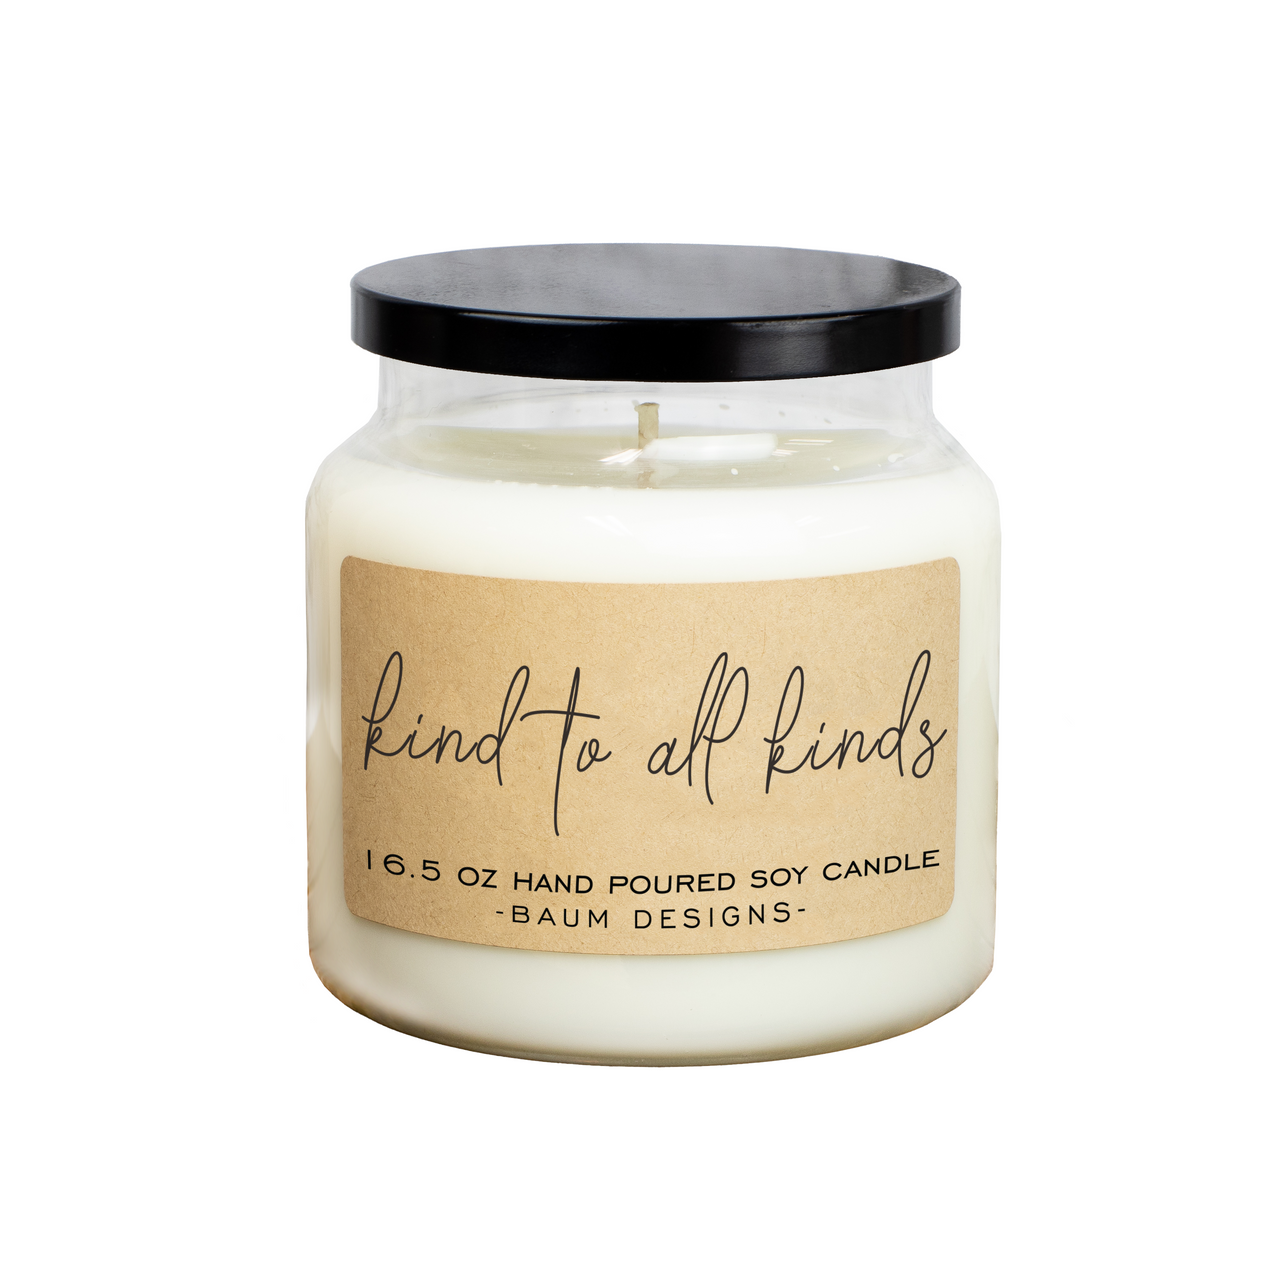 Kind To All Kinds Soy Candle